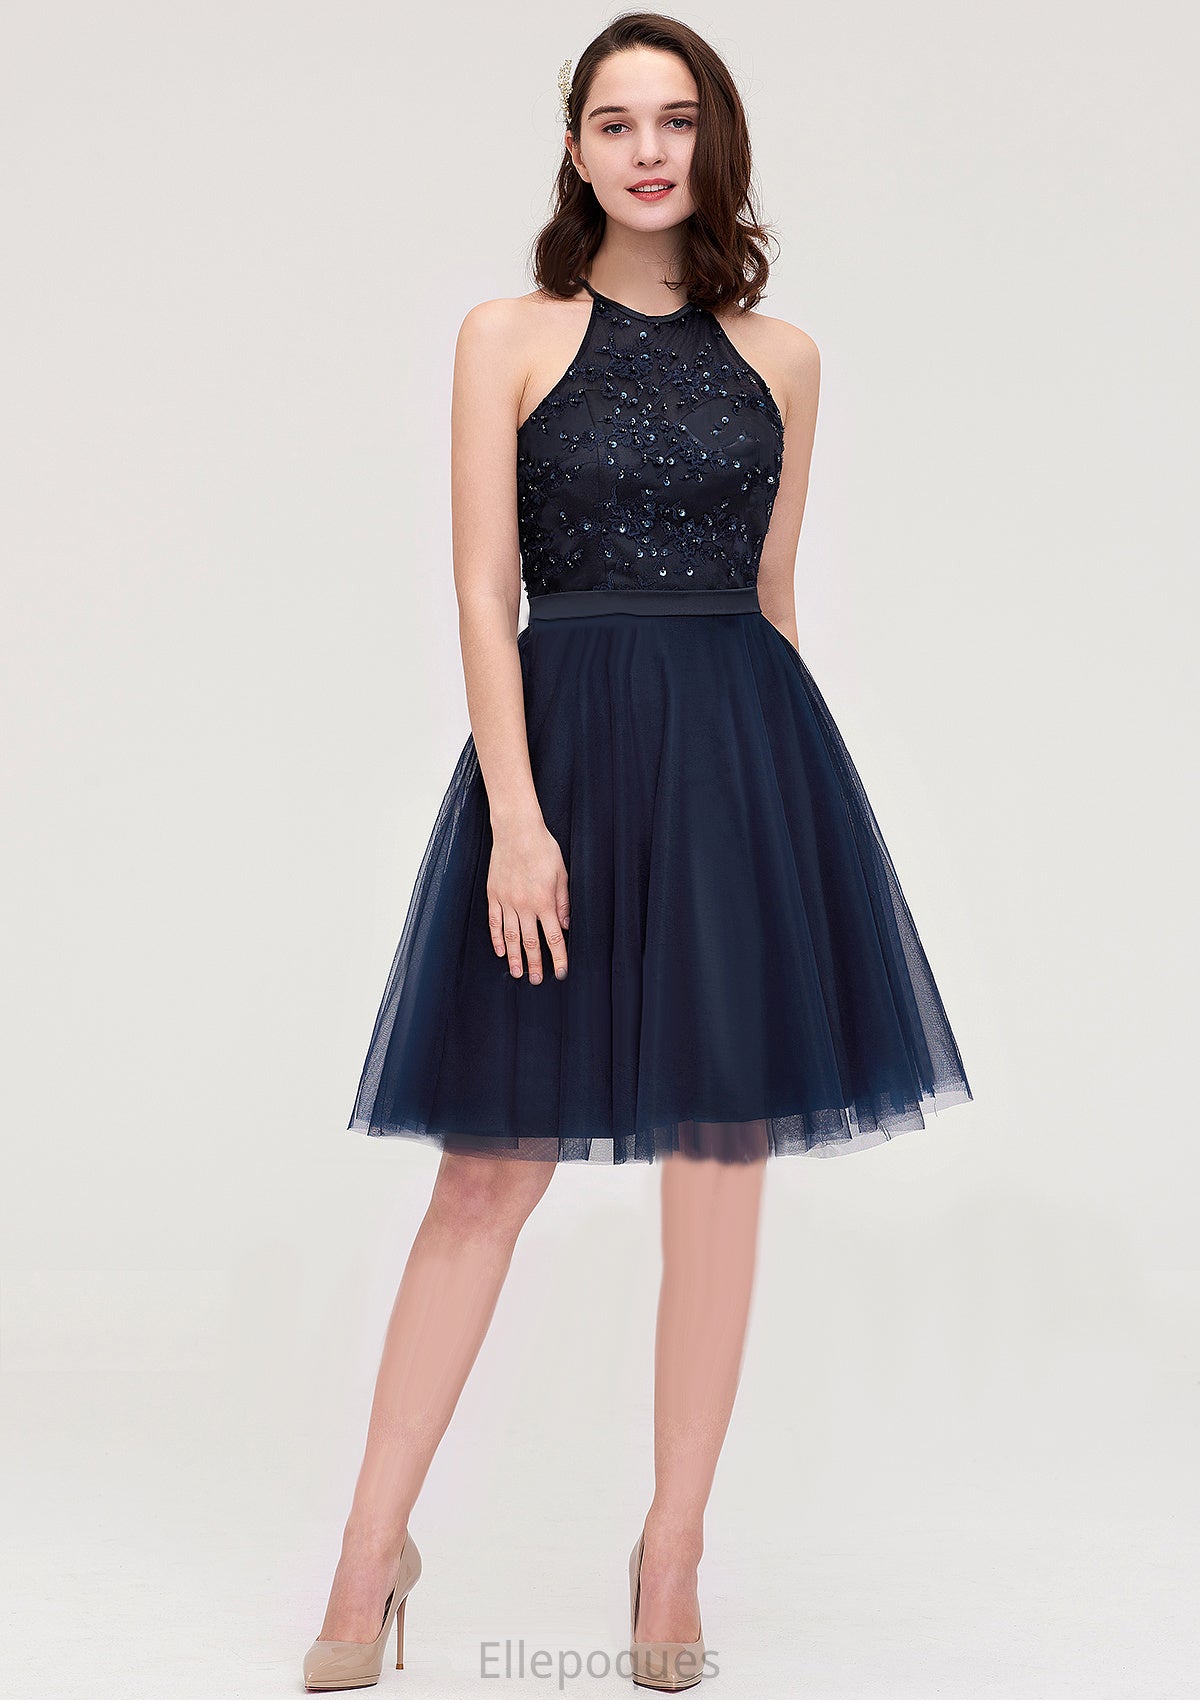 Sleeveless Halter Knee-Length Tulle A-line/Princess Bridesmaid Dresses With Sequins Appliqued Sashes Skye HOP0025430